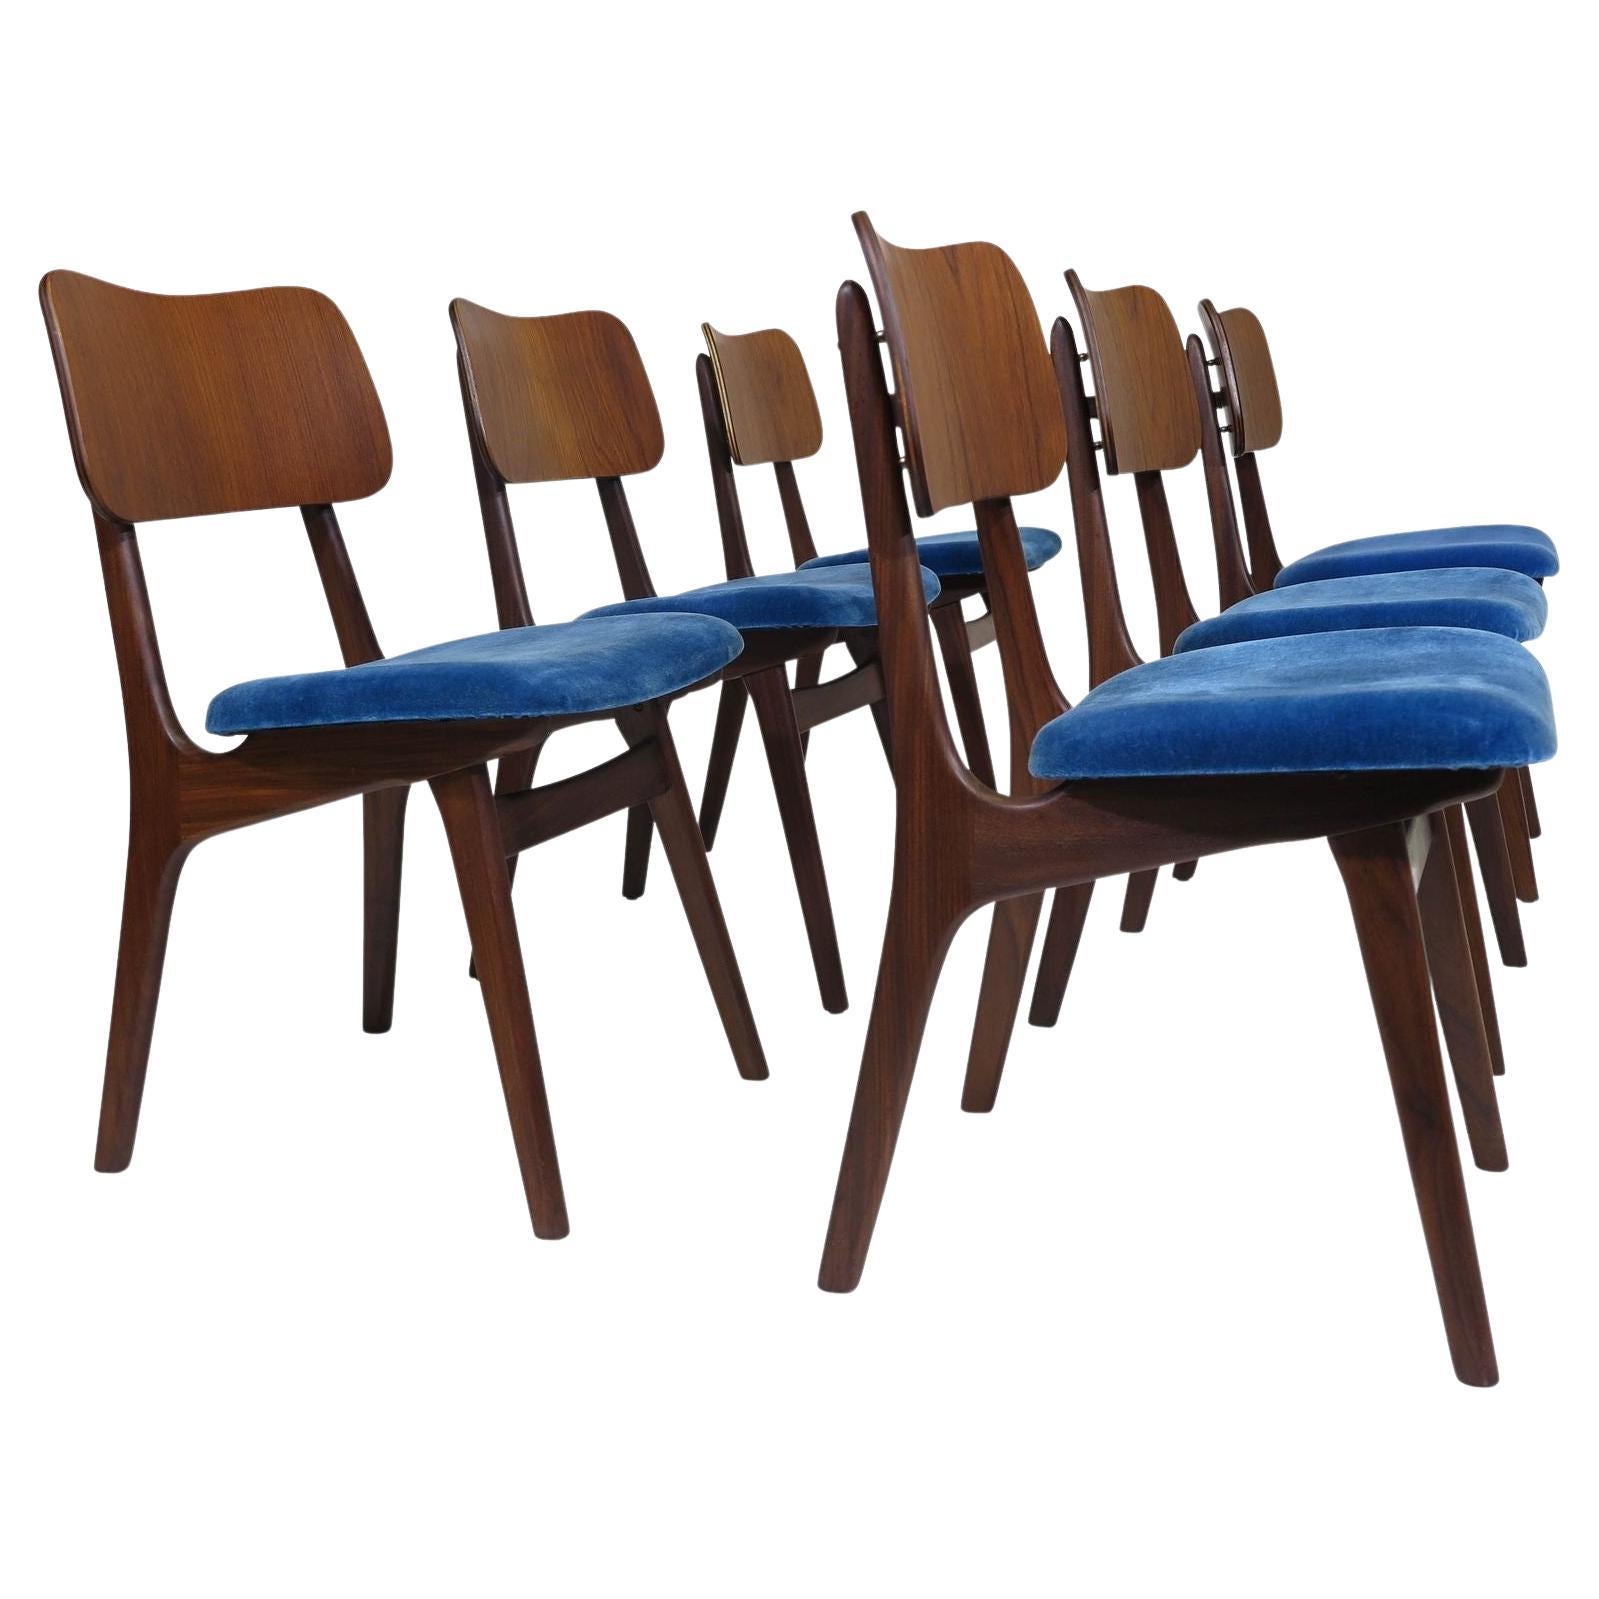 Six Arne Hovmand-Olsen Walnut and Teak Dining Chairs, 30 Available For Sale